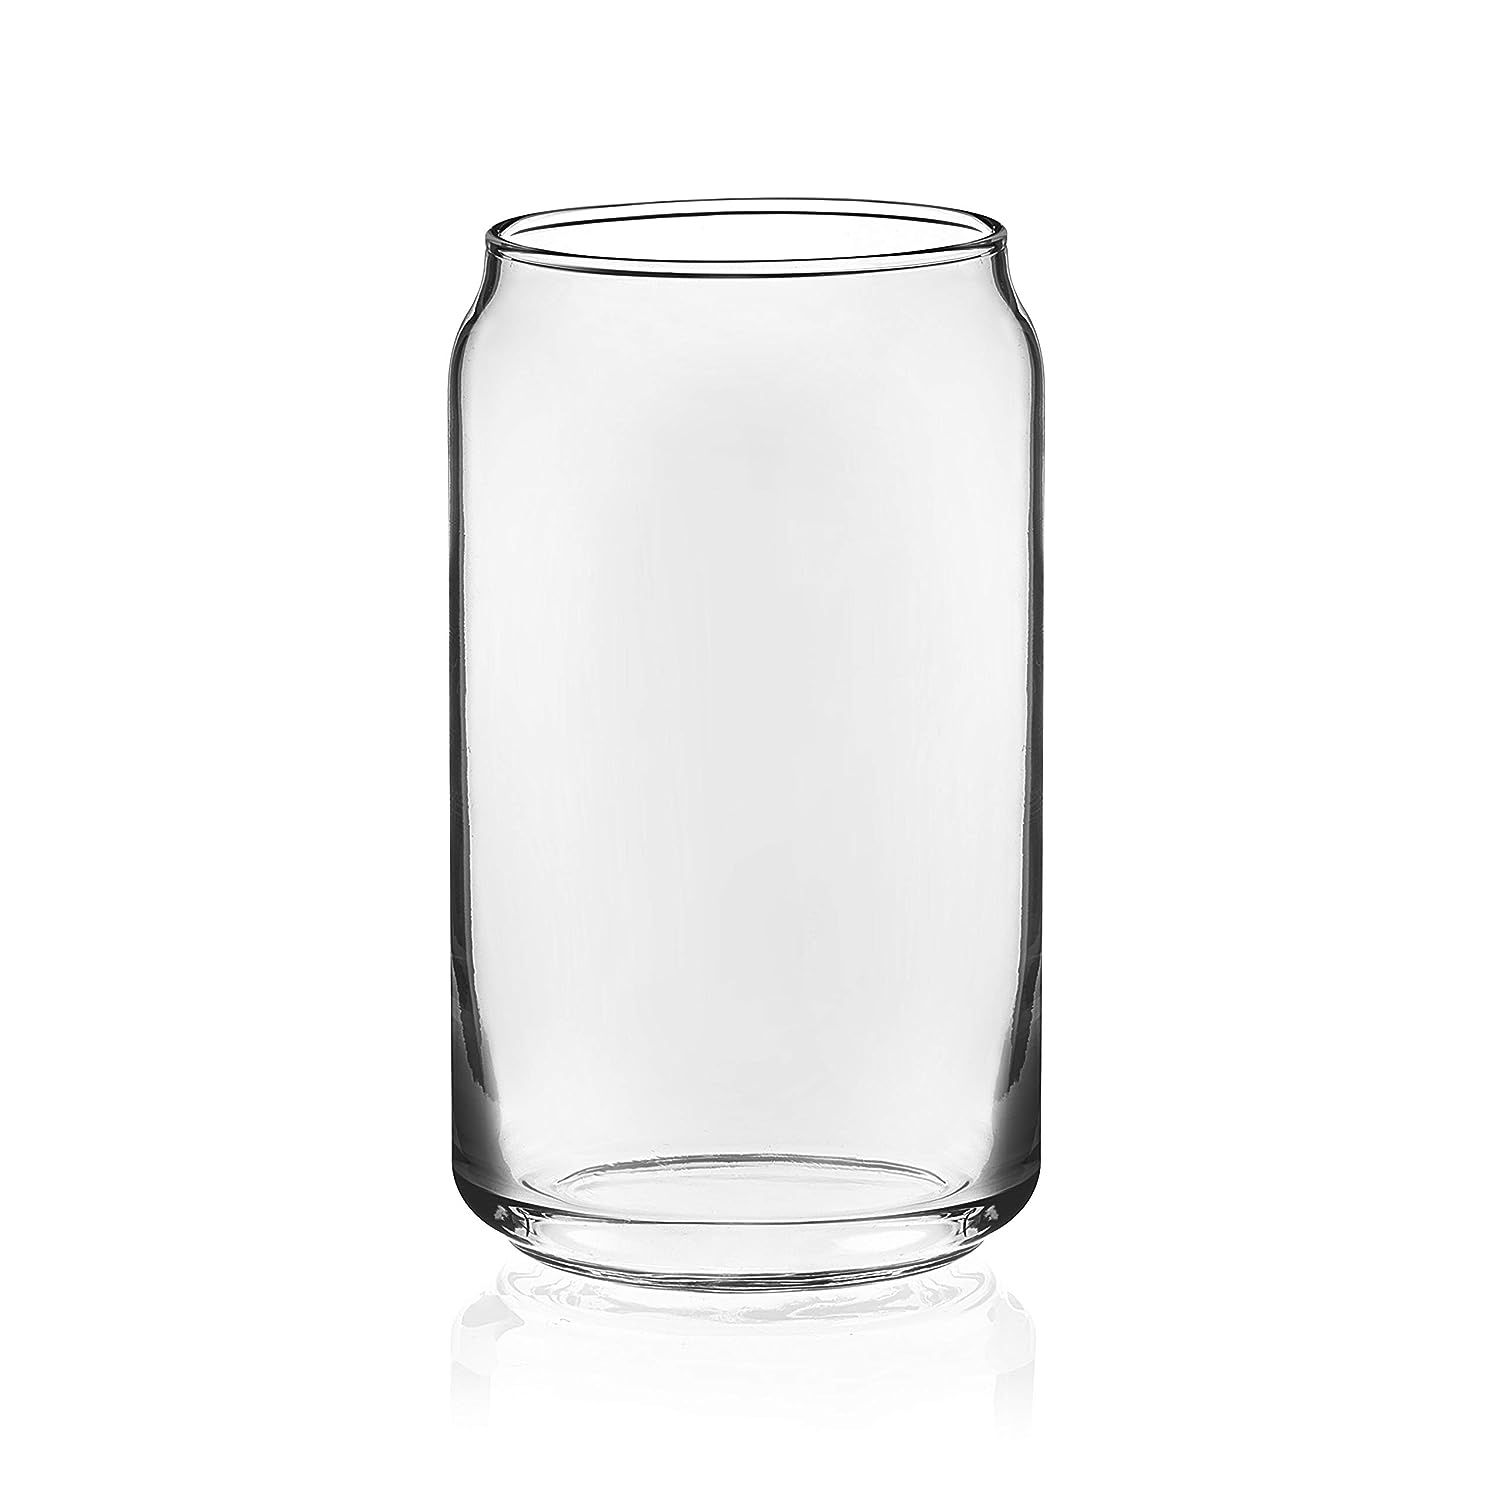 Libbey Classic Can Tumbler Glasses, Set of 4, Pack of 4, Clear | Amazon (US)